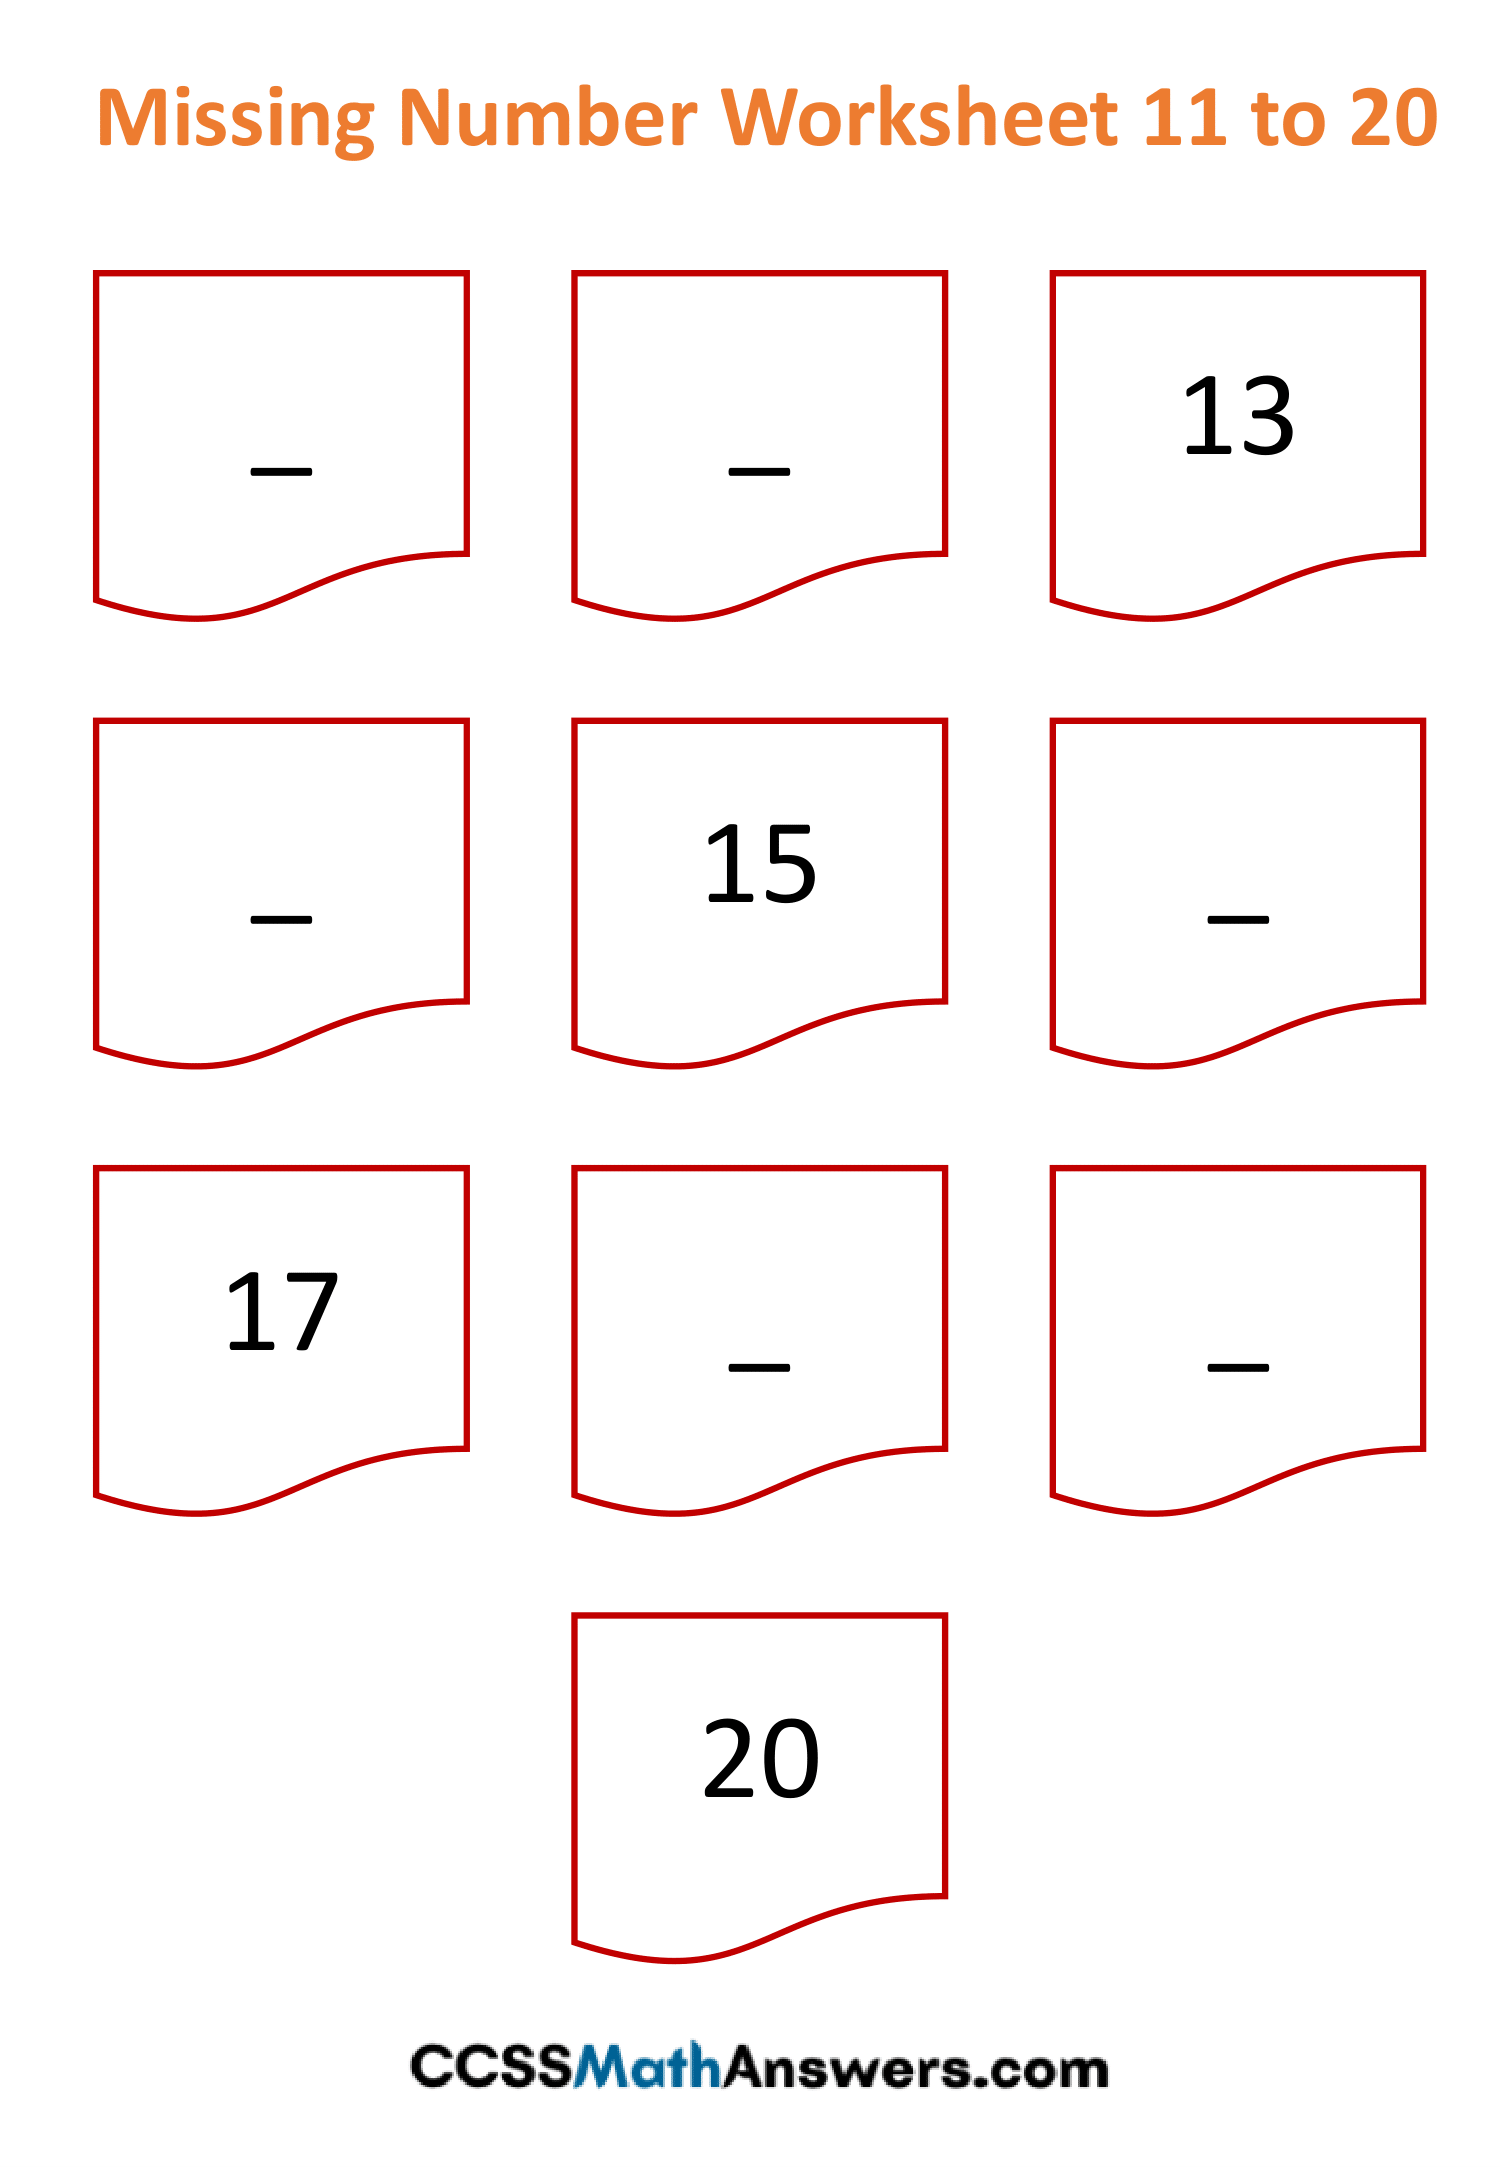 Fill in the Missing Number Worksheets 1 to 20